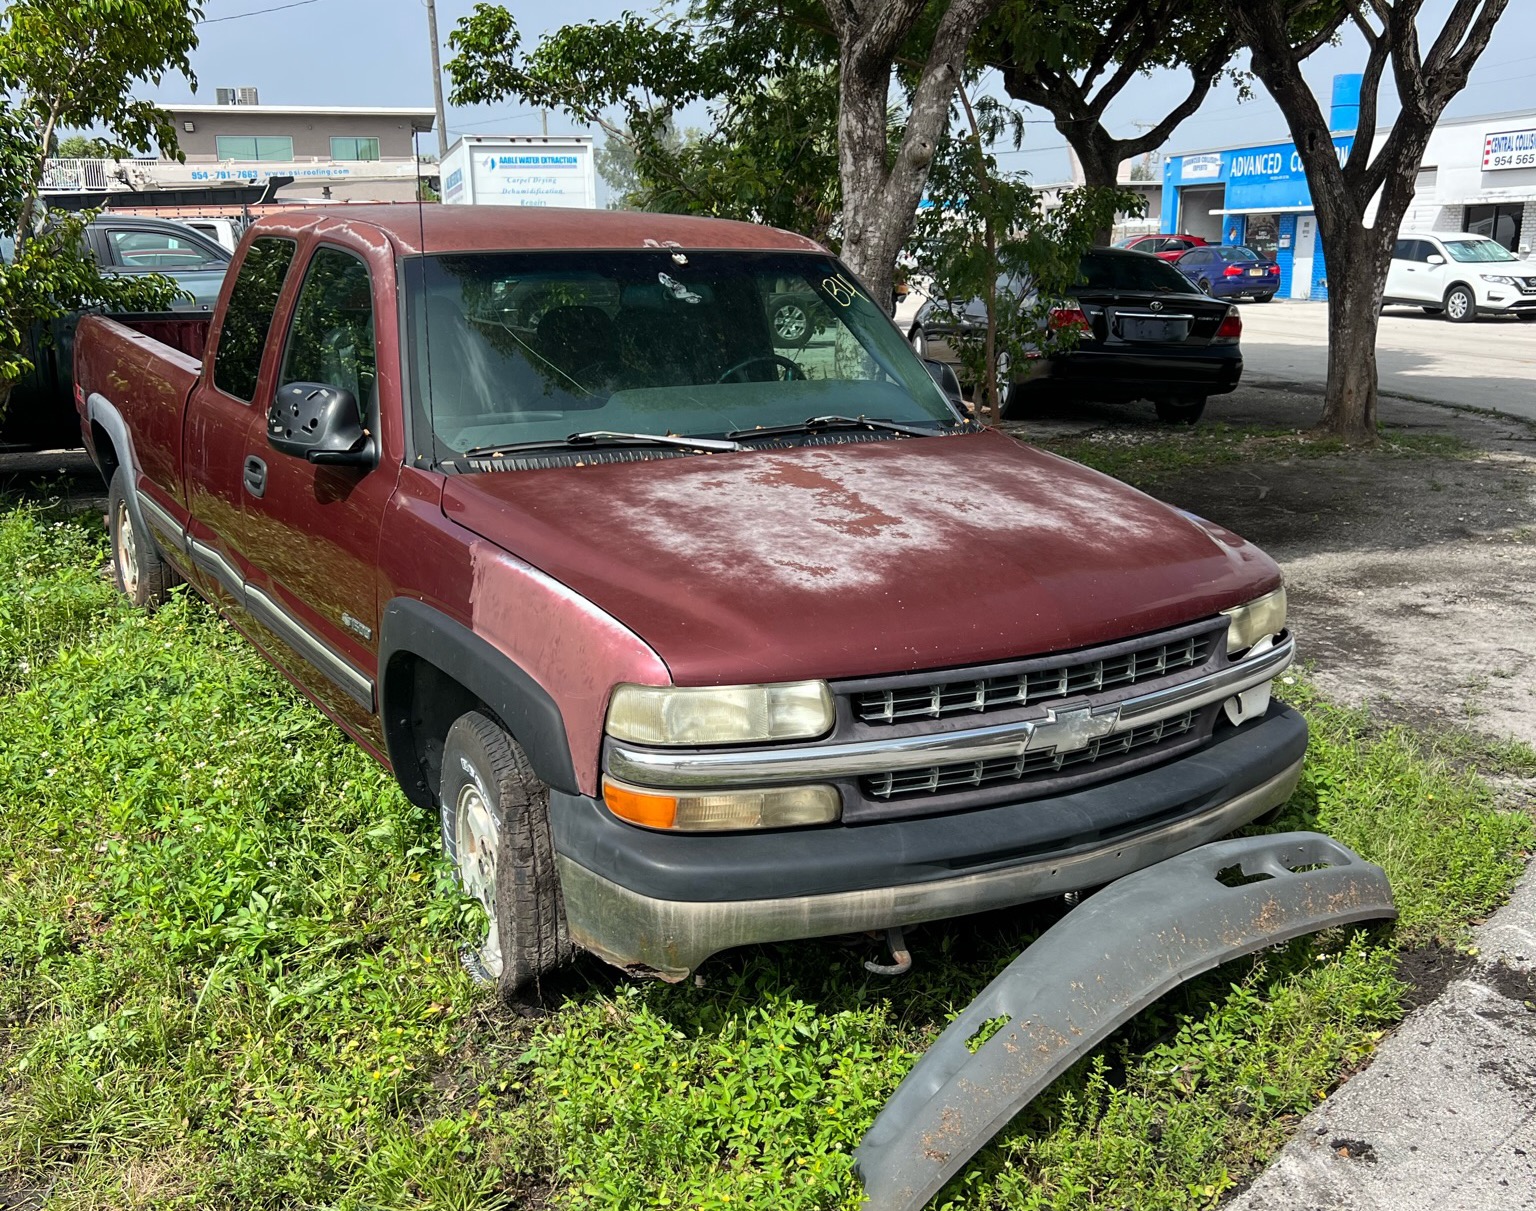 Junk car being picked up for cash in Miami-Dade County, FL